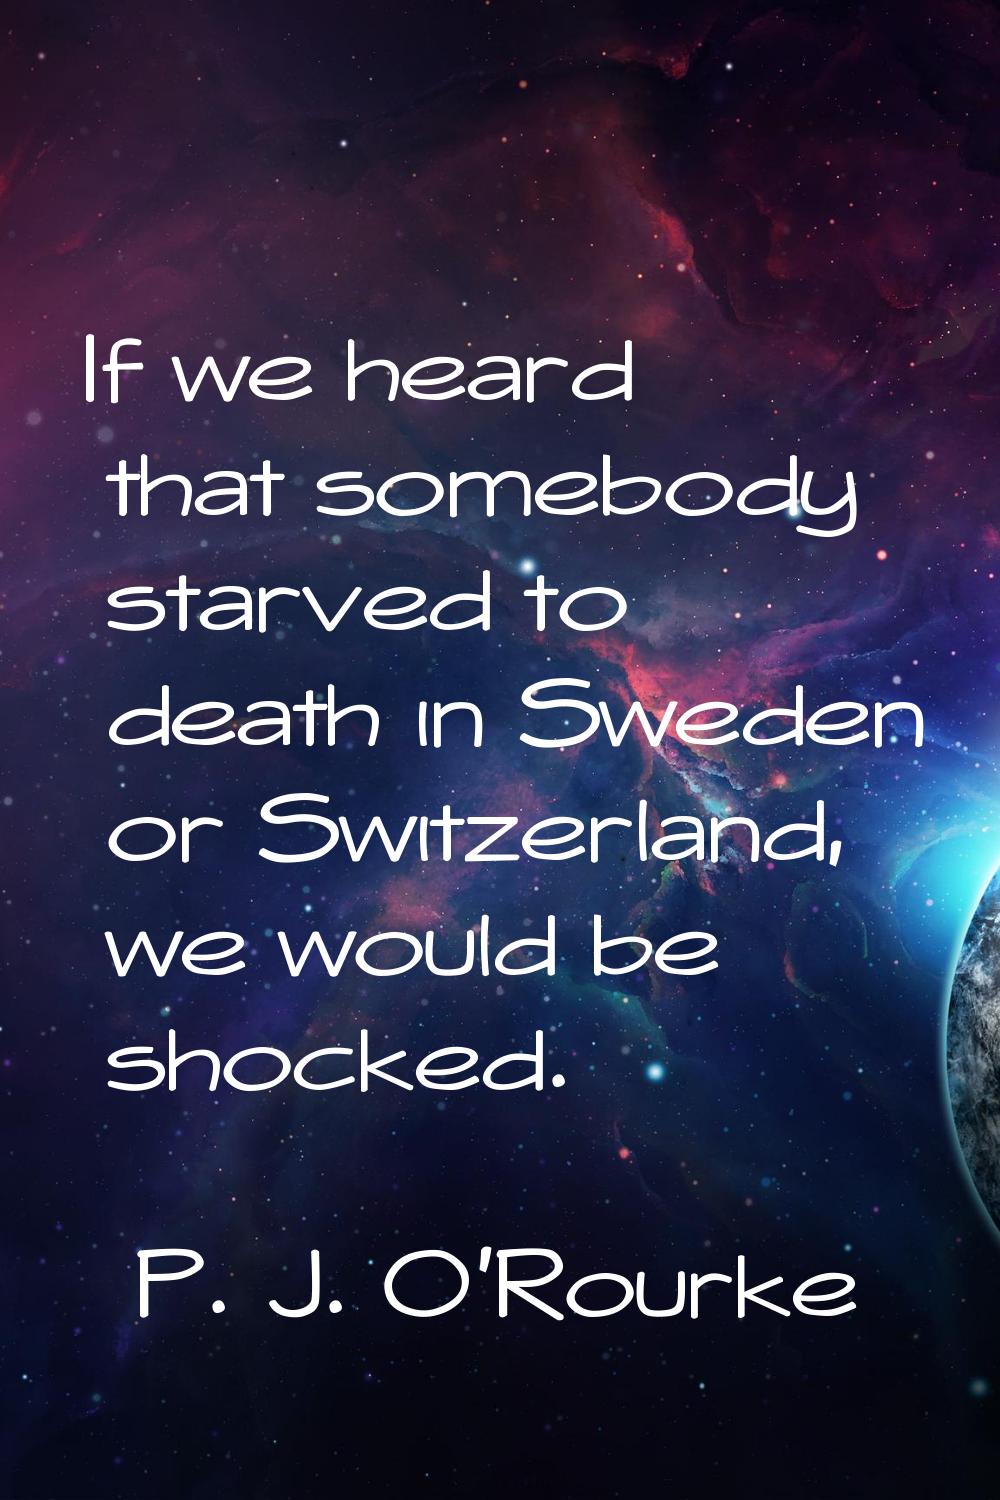 If we heard that somebody starved to death in Sweden or Switzerland, we would be shocked.